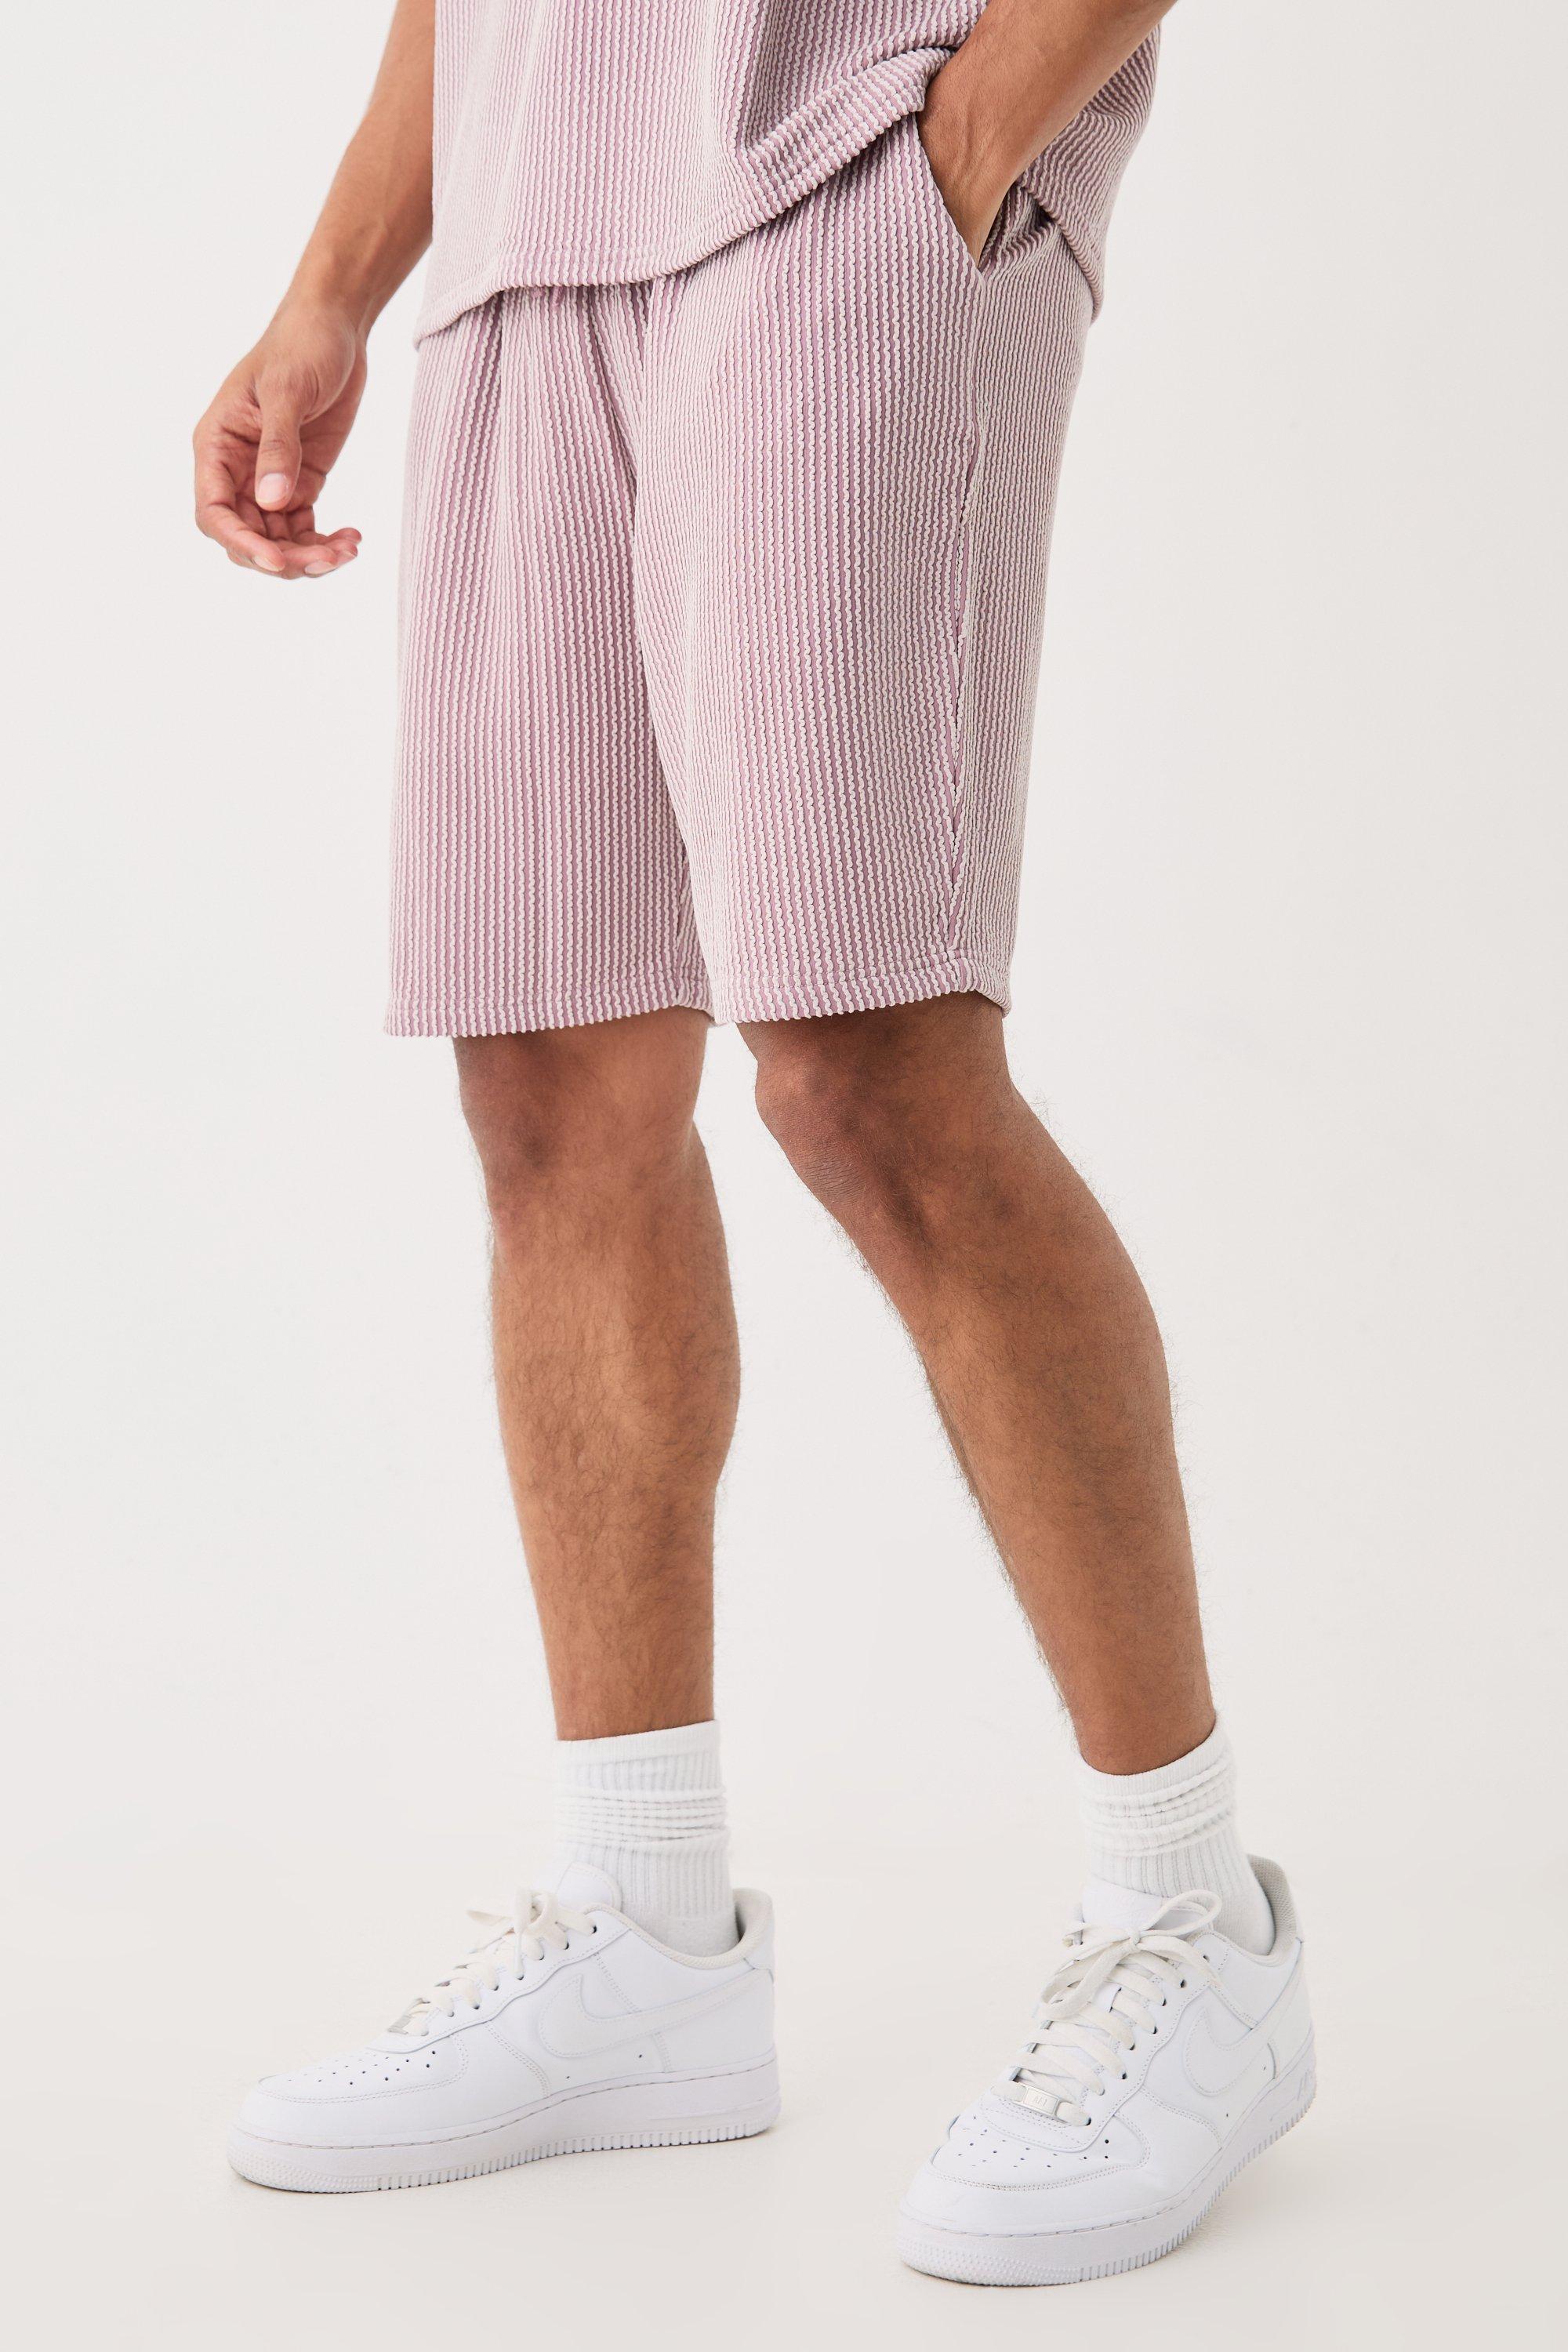 Image of Relaxed Fit Mid Length Stripe Texture Shorts, Purple